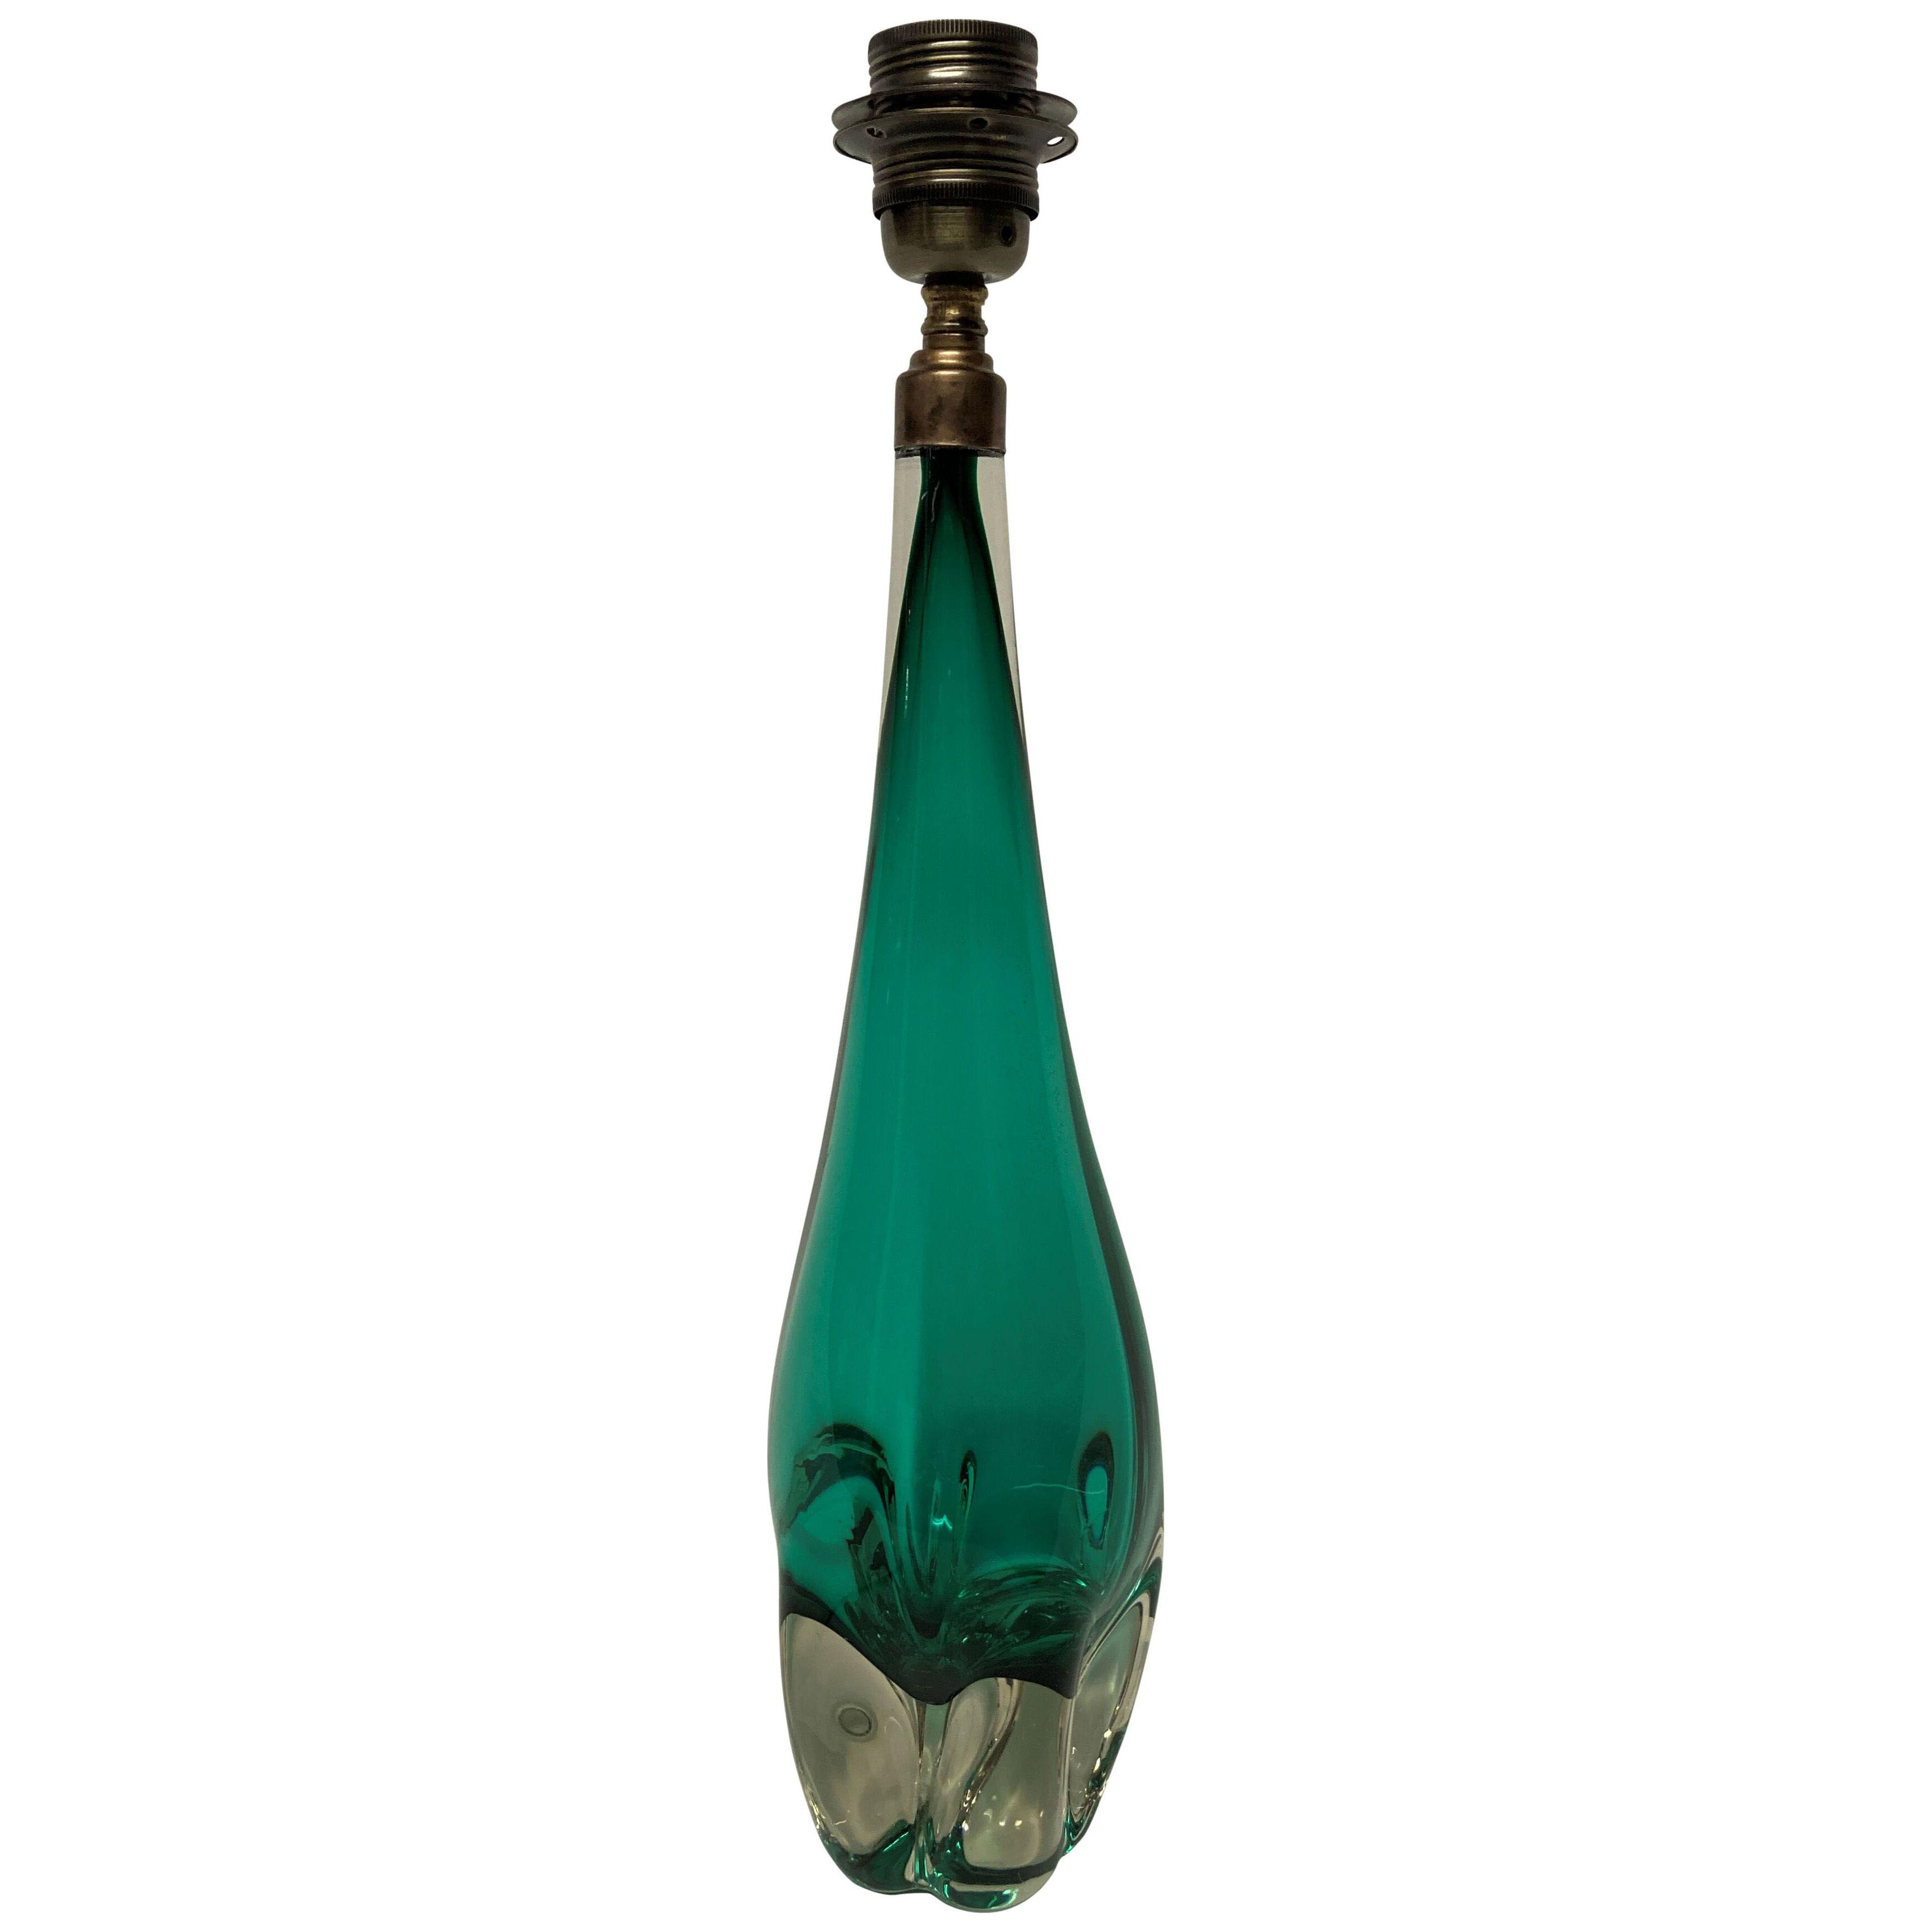 A MID-CENTURY VENTIAN GLASS LAMP IN GREEN